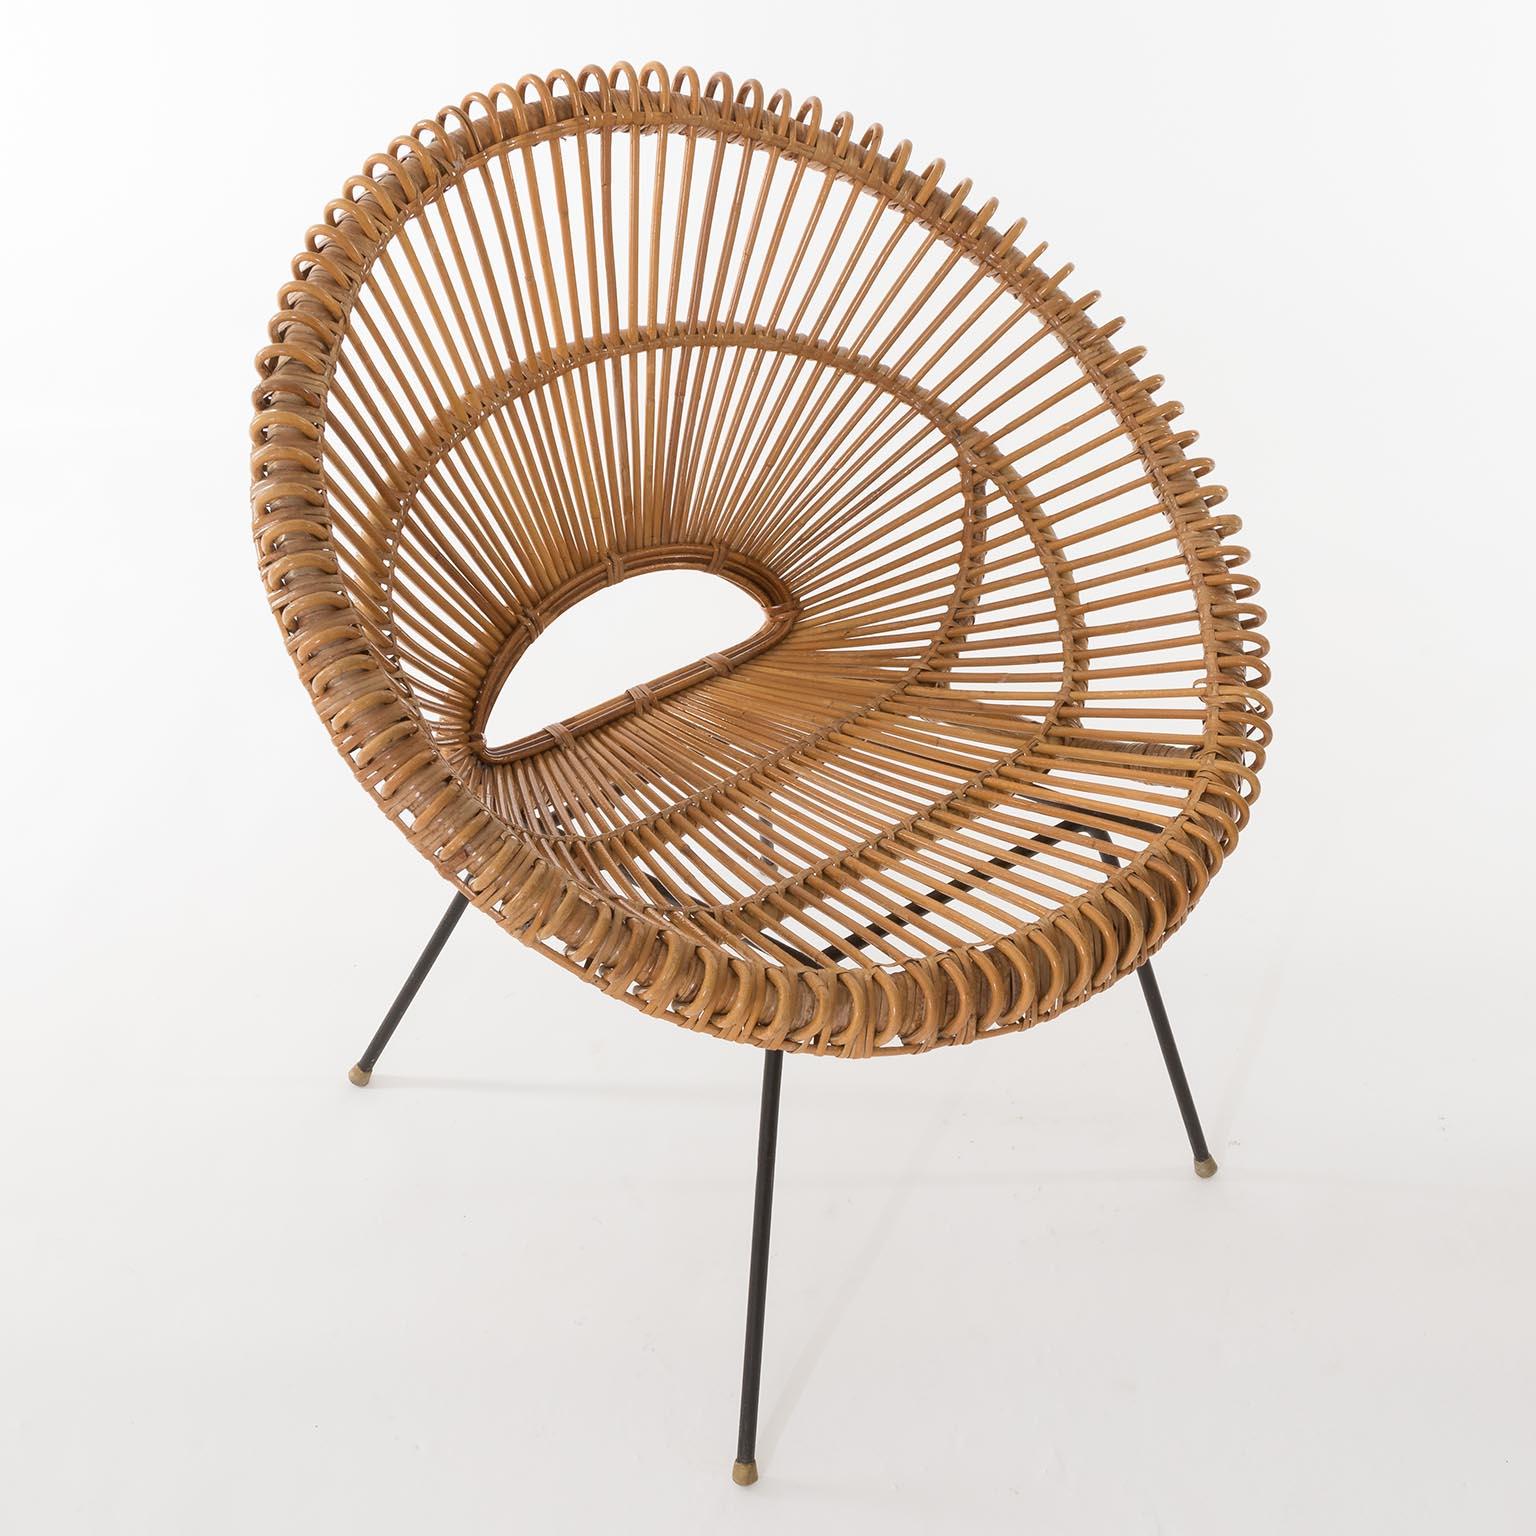 Mid-20th Century Pair of Mid-Century Modern Rattan Bamboo Chairs, Janine Abraham, Dirk Rol, 1960s For Sale